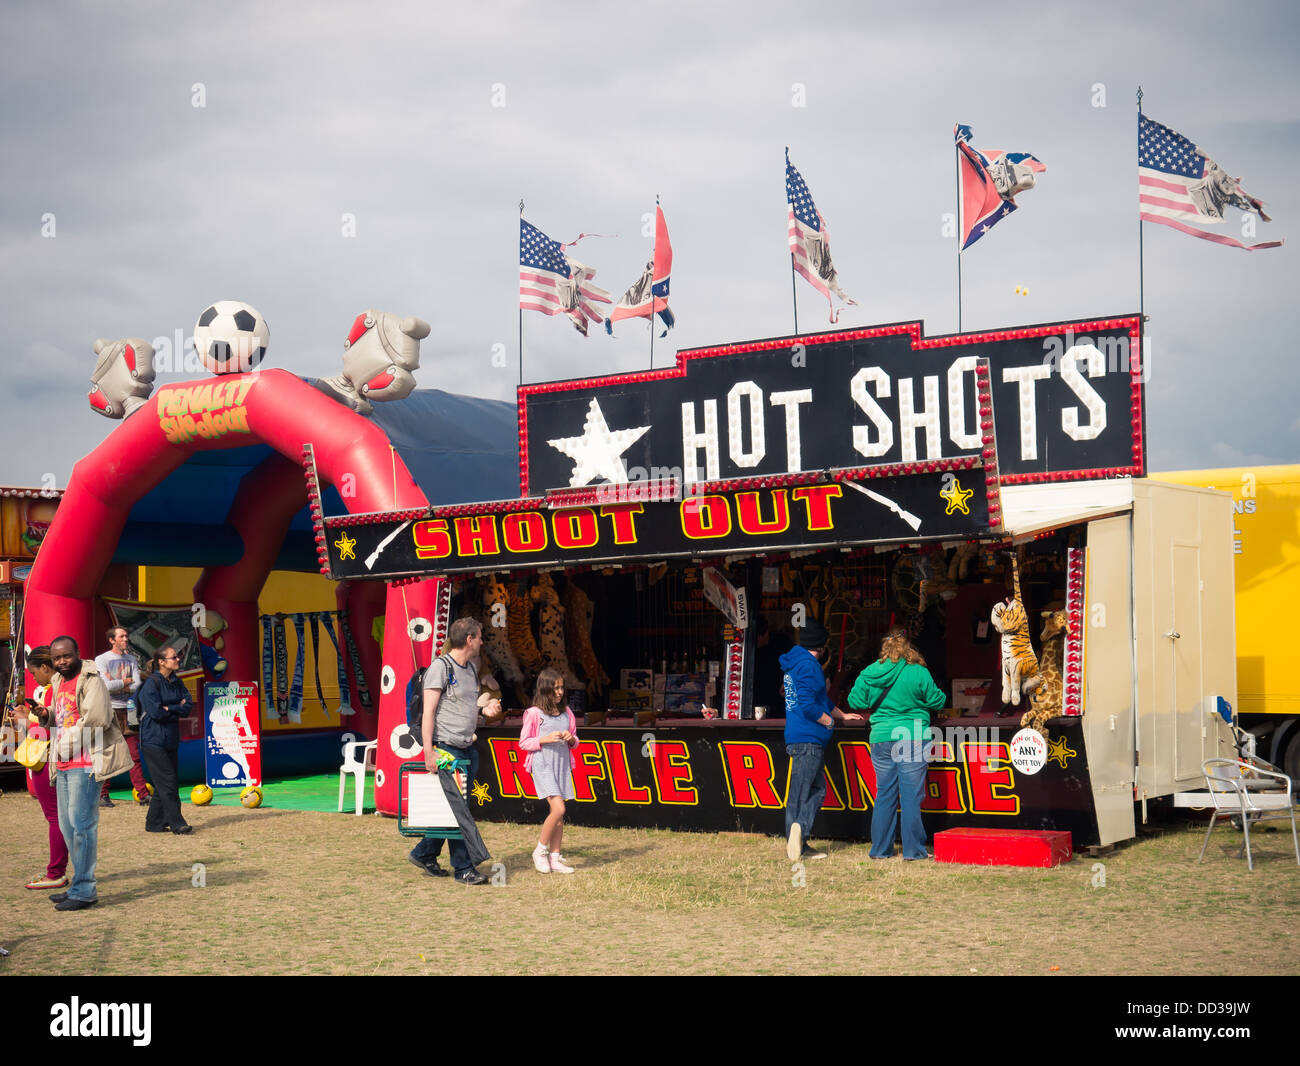 A shooting gallery at a traveling funfair with tattered American and confederate flags flying Stock Photo